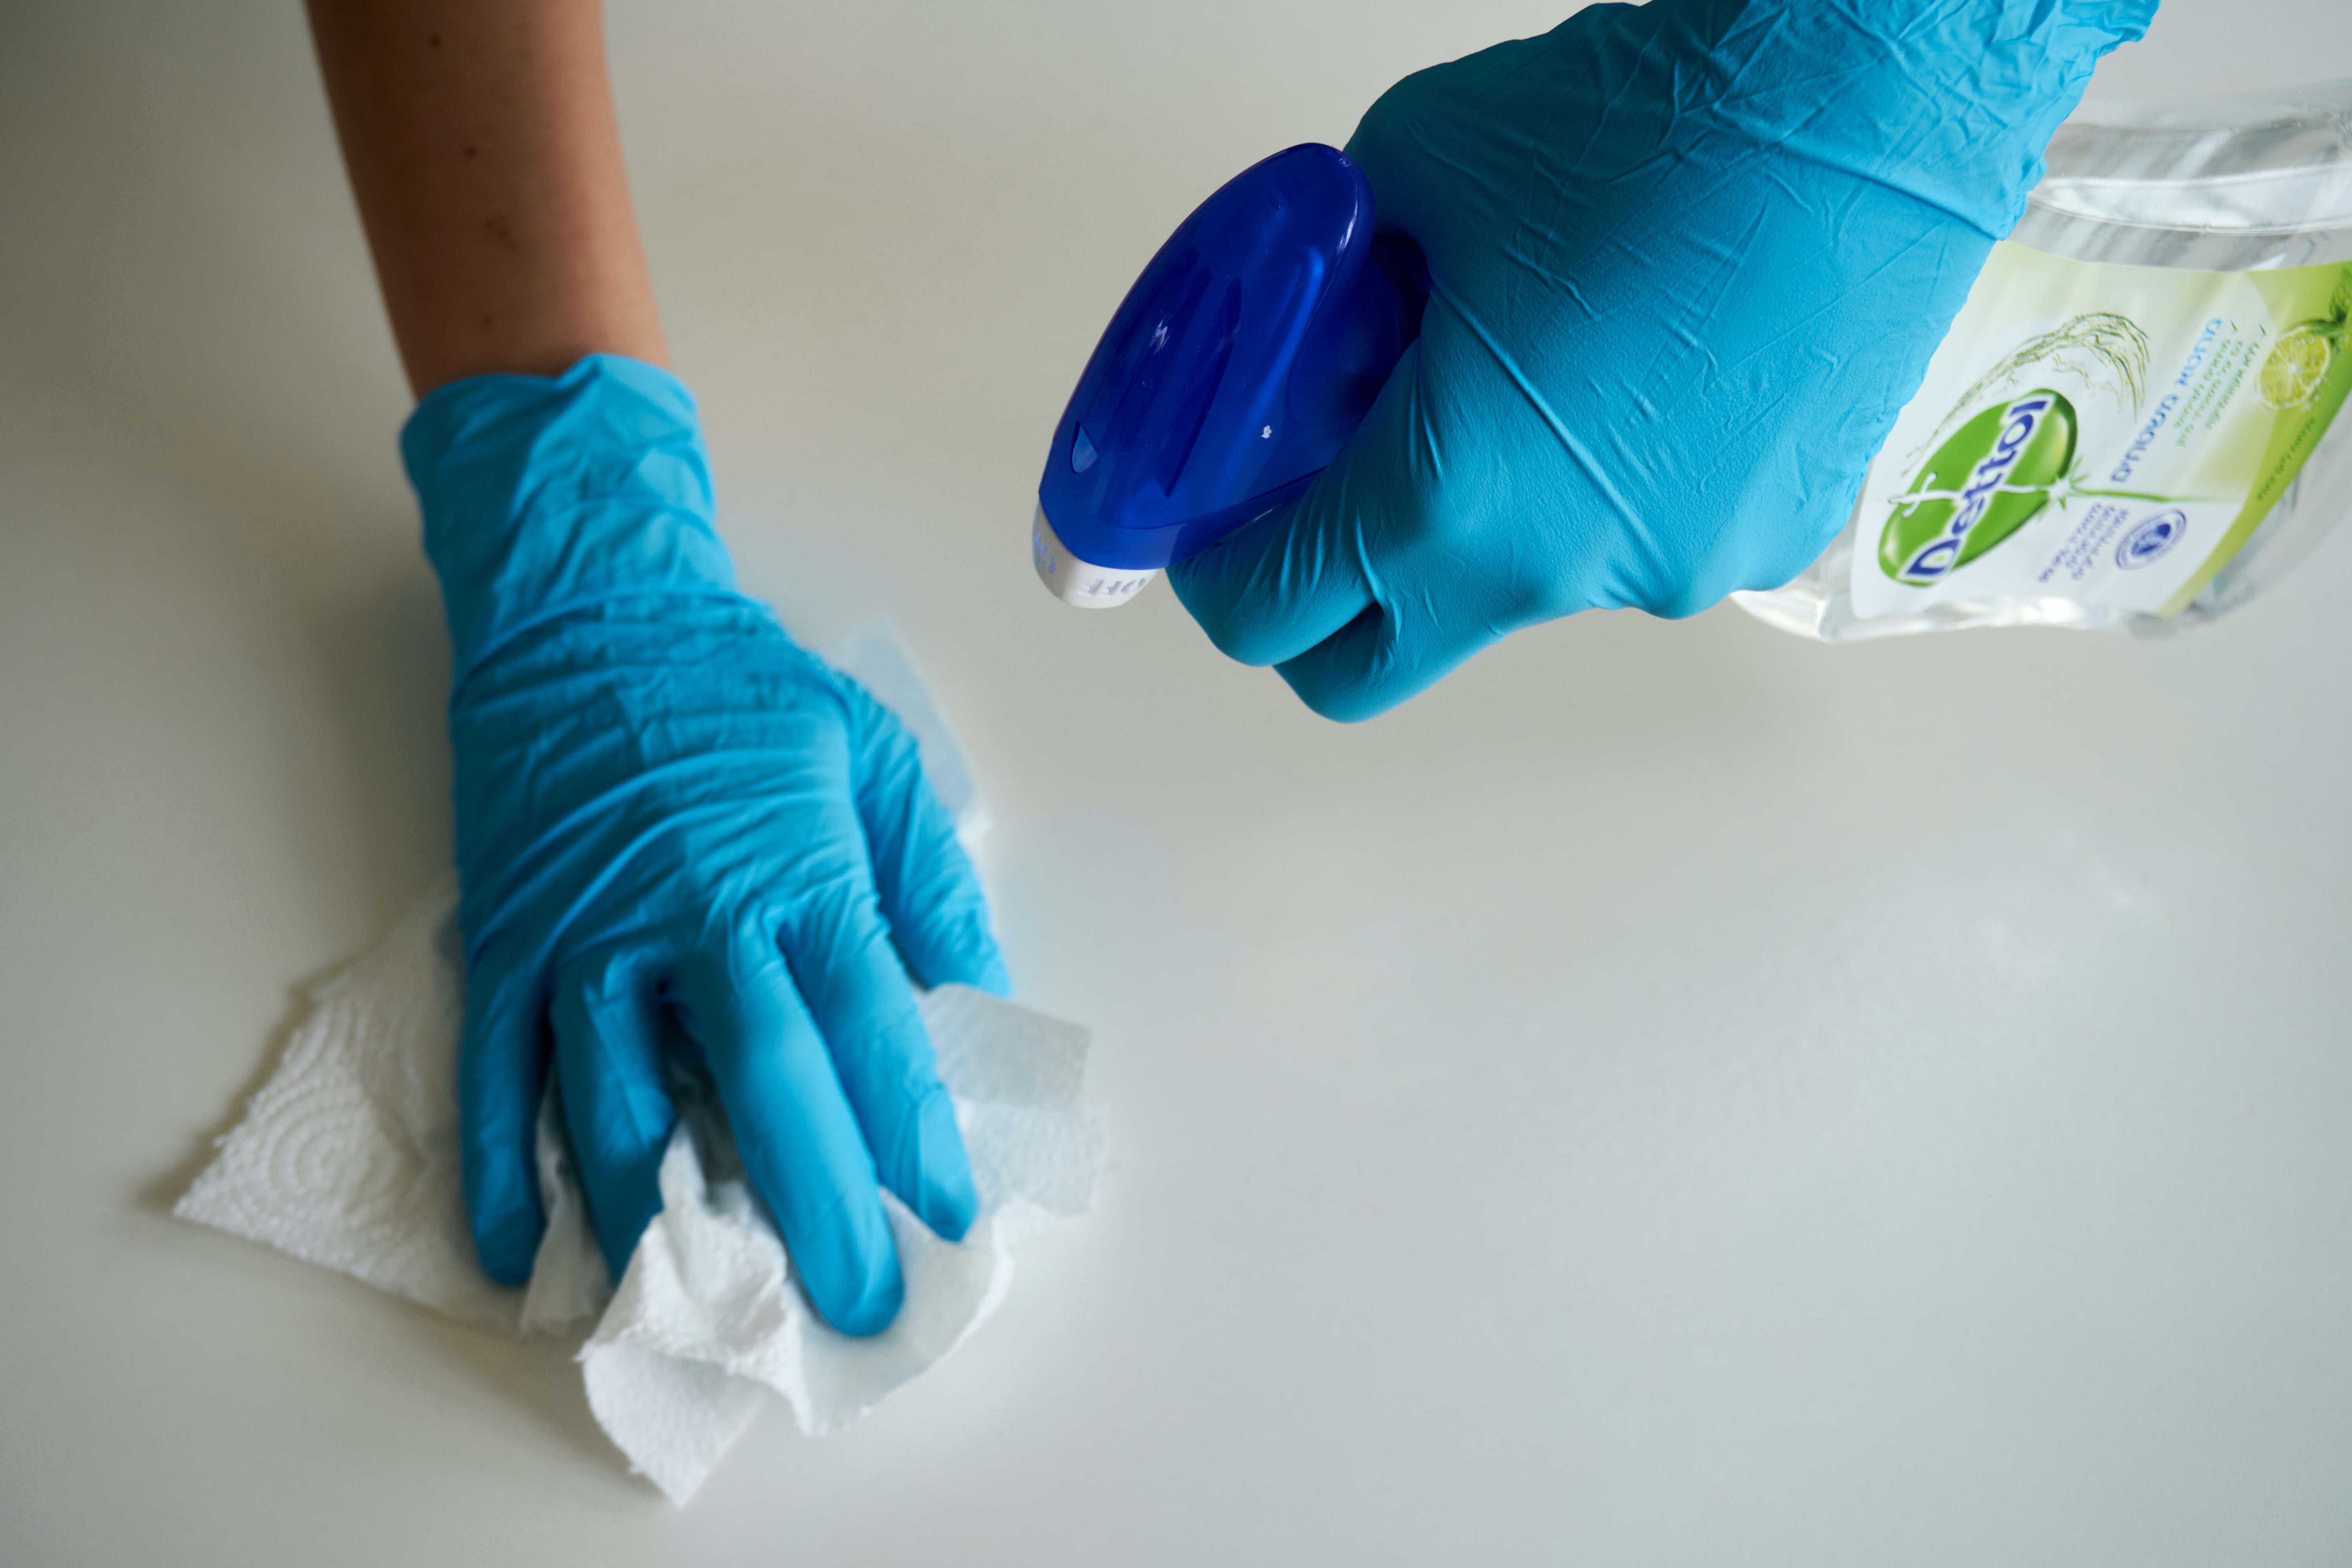 A person in gloves using disinfectant spray and a paper towel to clean a surface